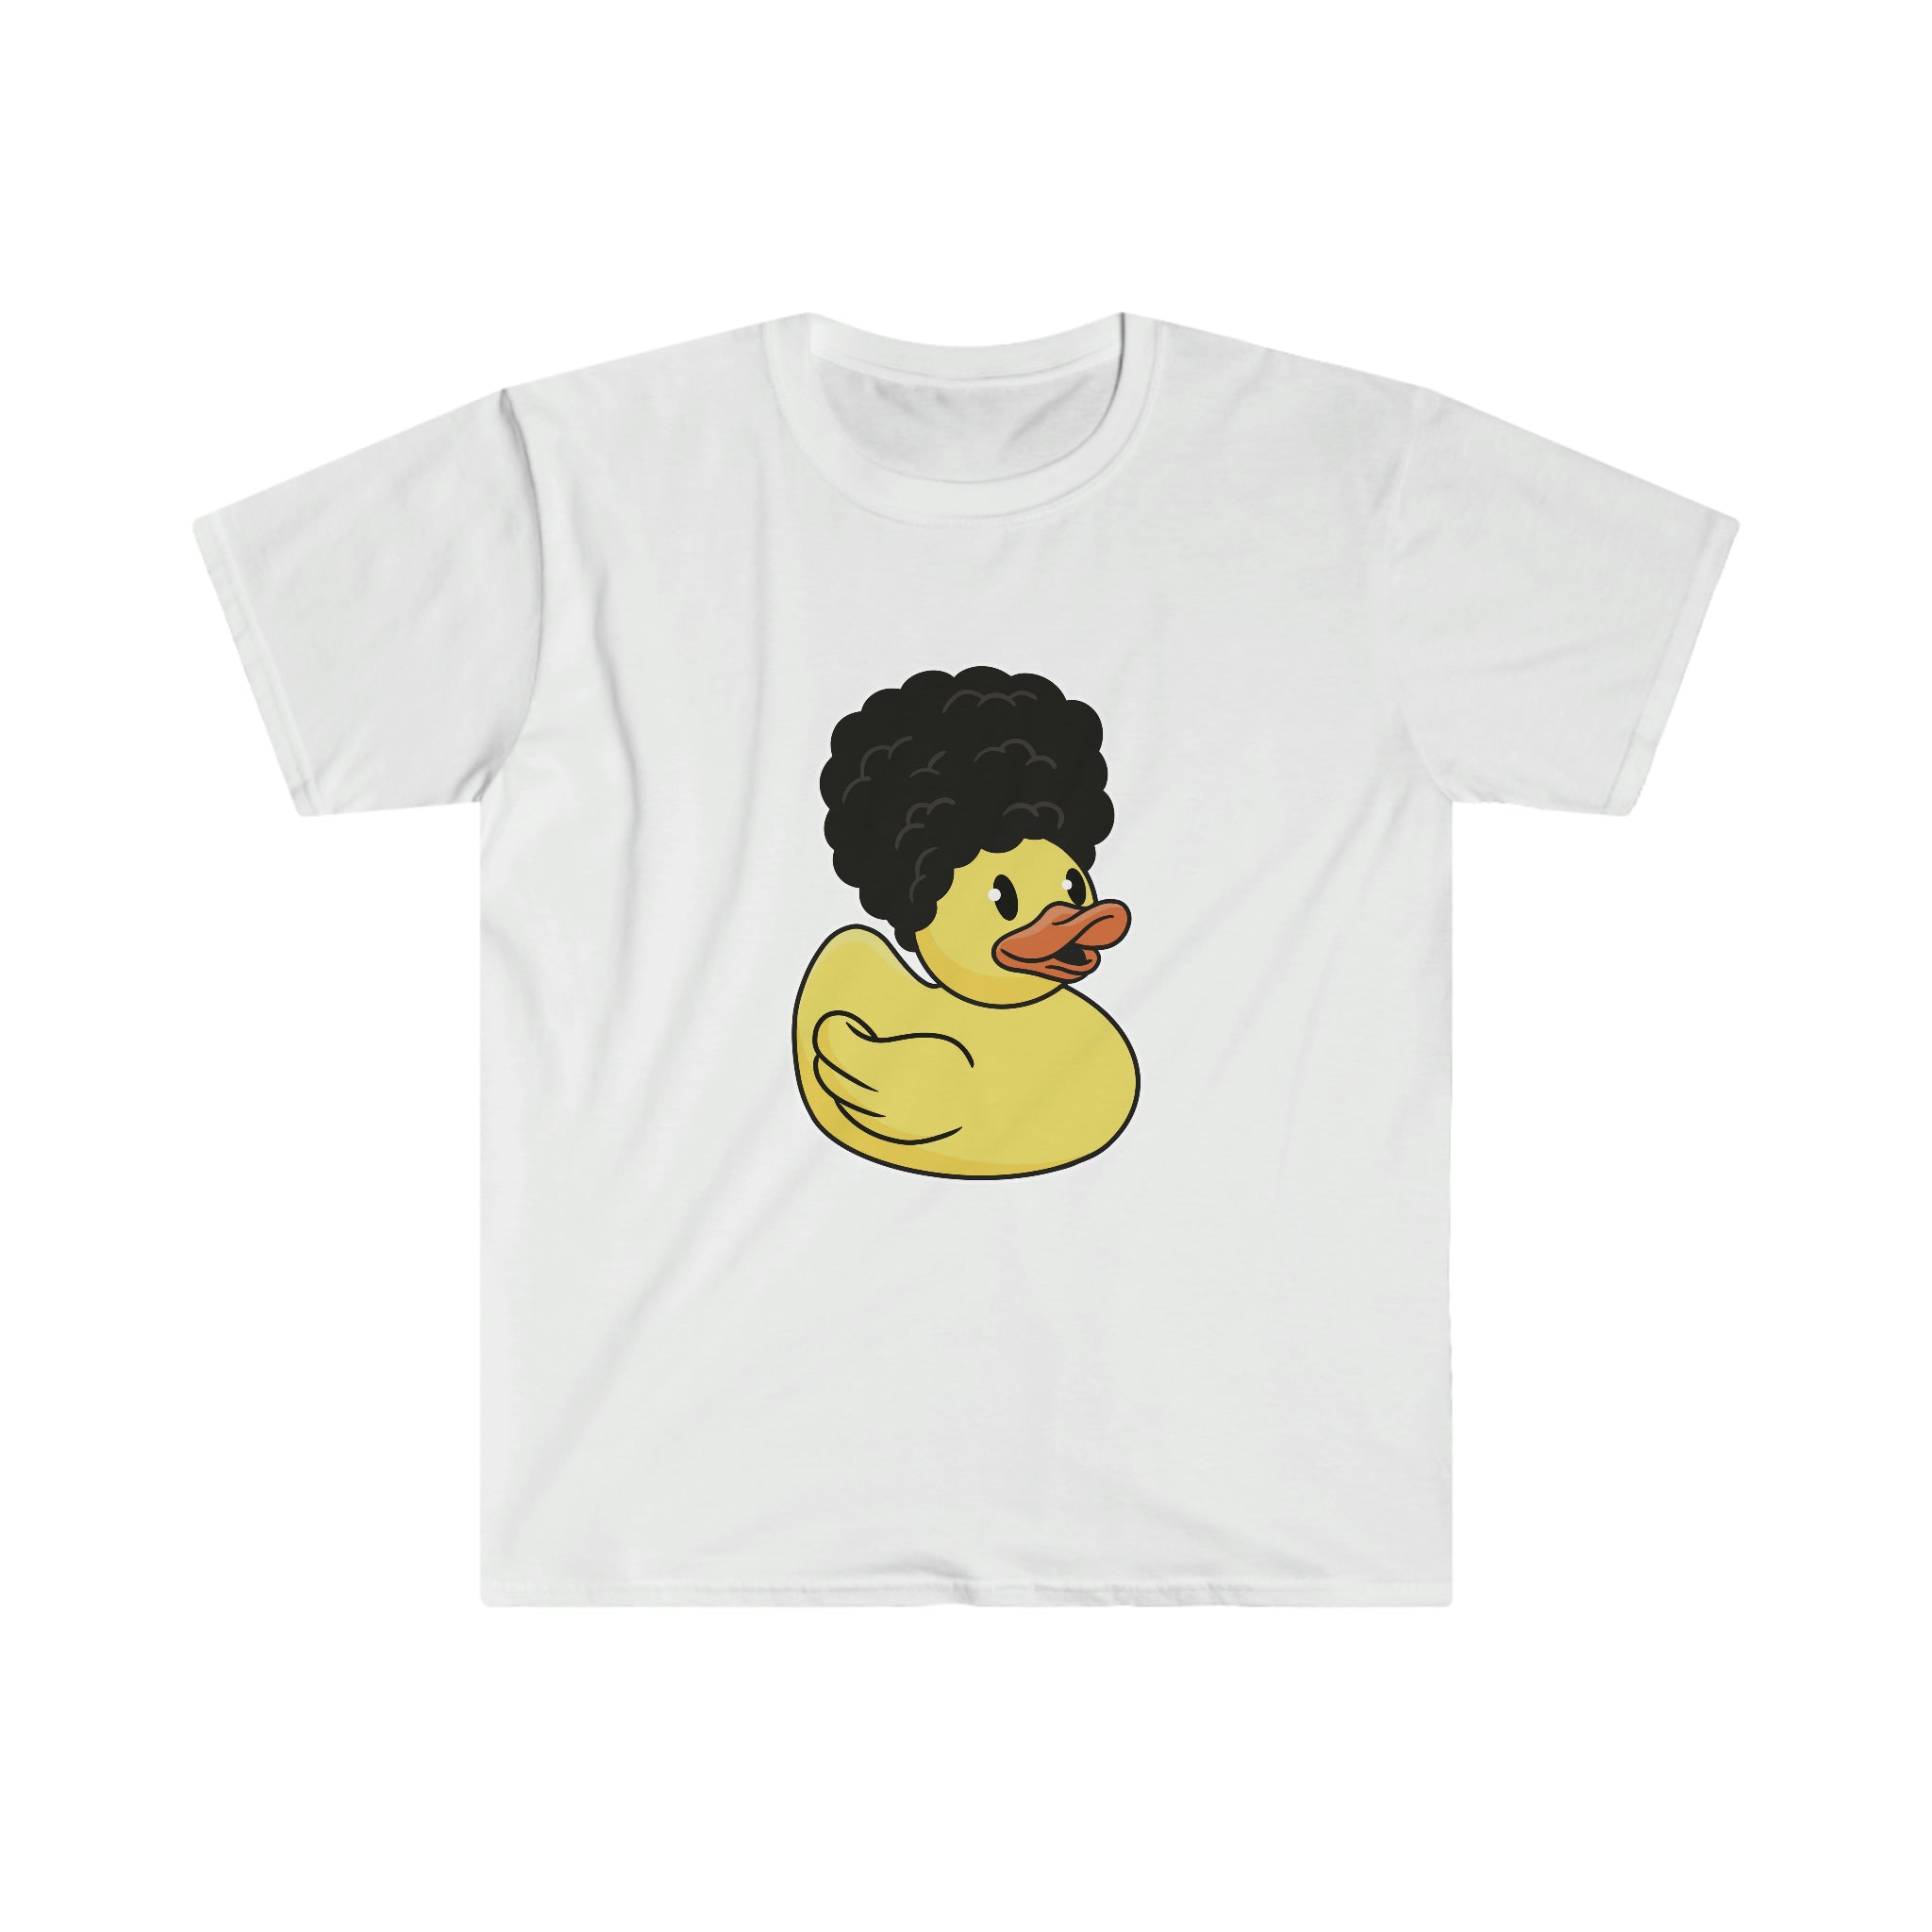 A white Cool Duck t-shirt with a rubber duck with afro hair, made by Printify.